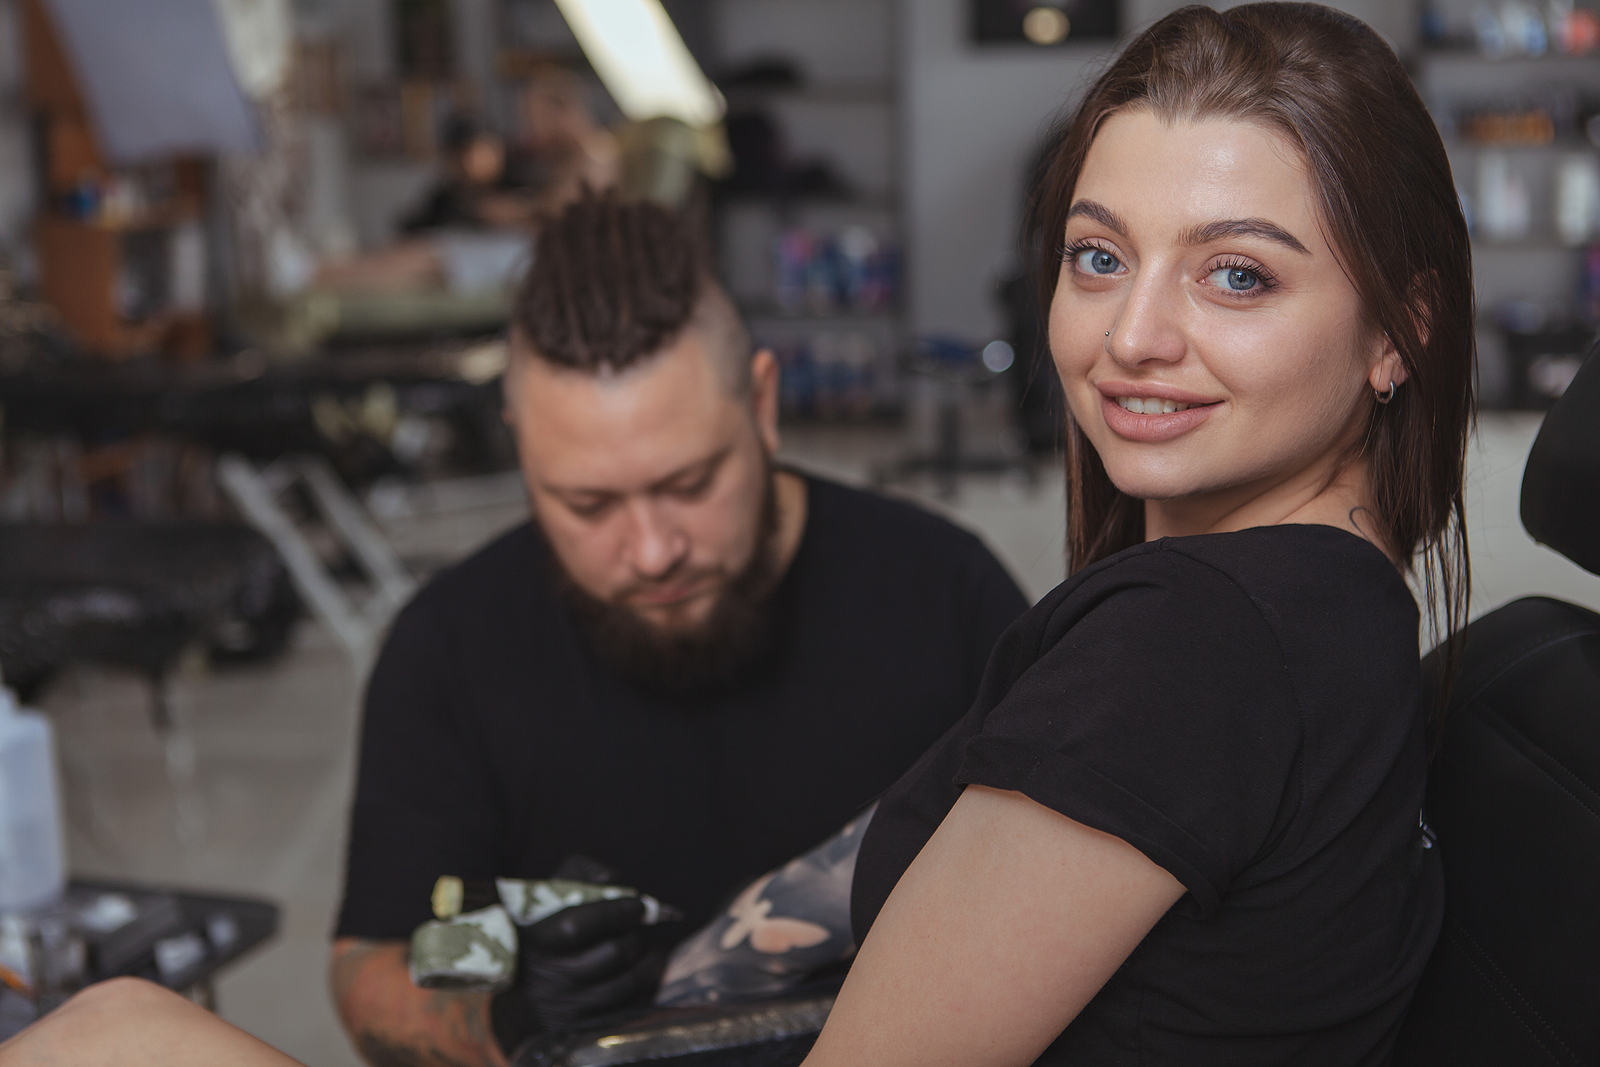 A woman smiles and looks at the camera while getting a tattoo on her arm.